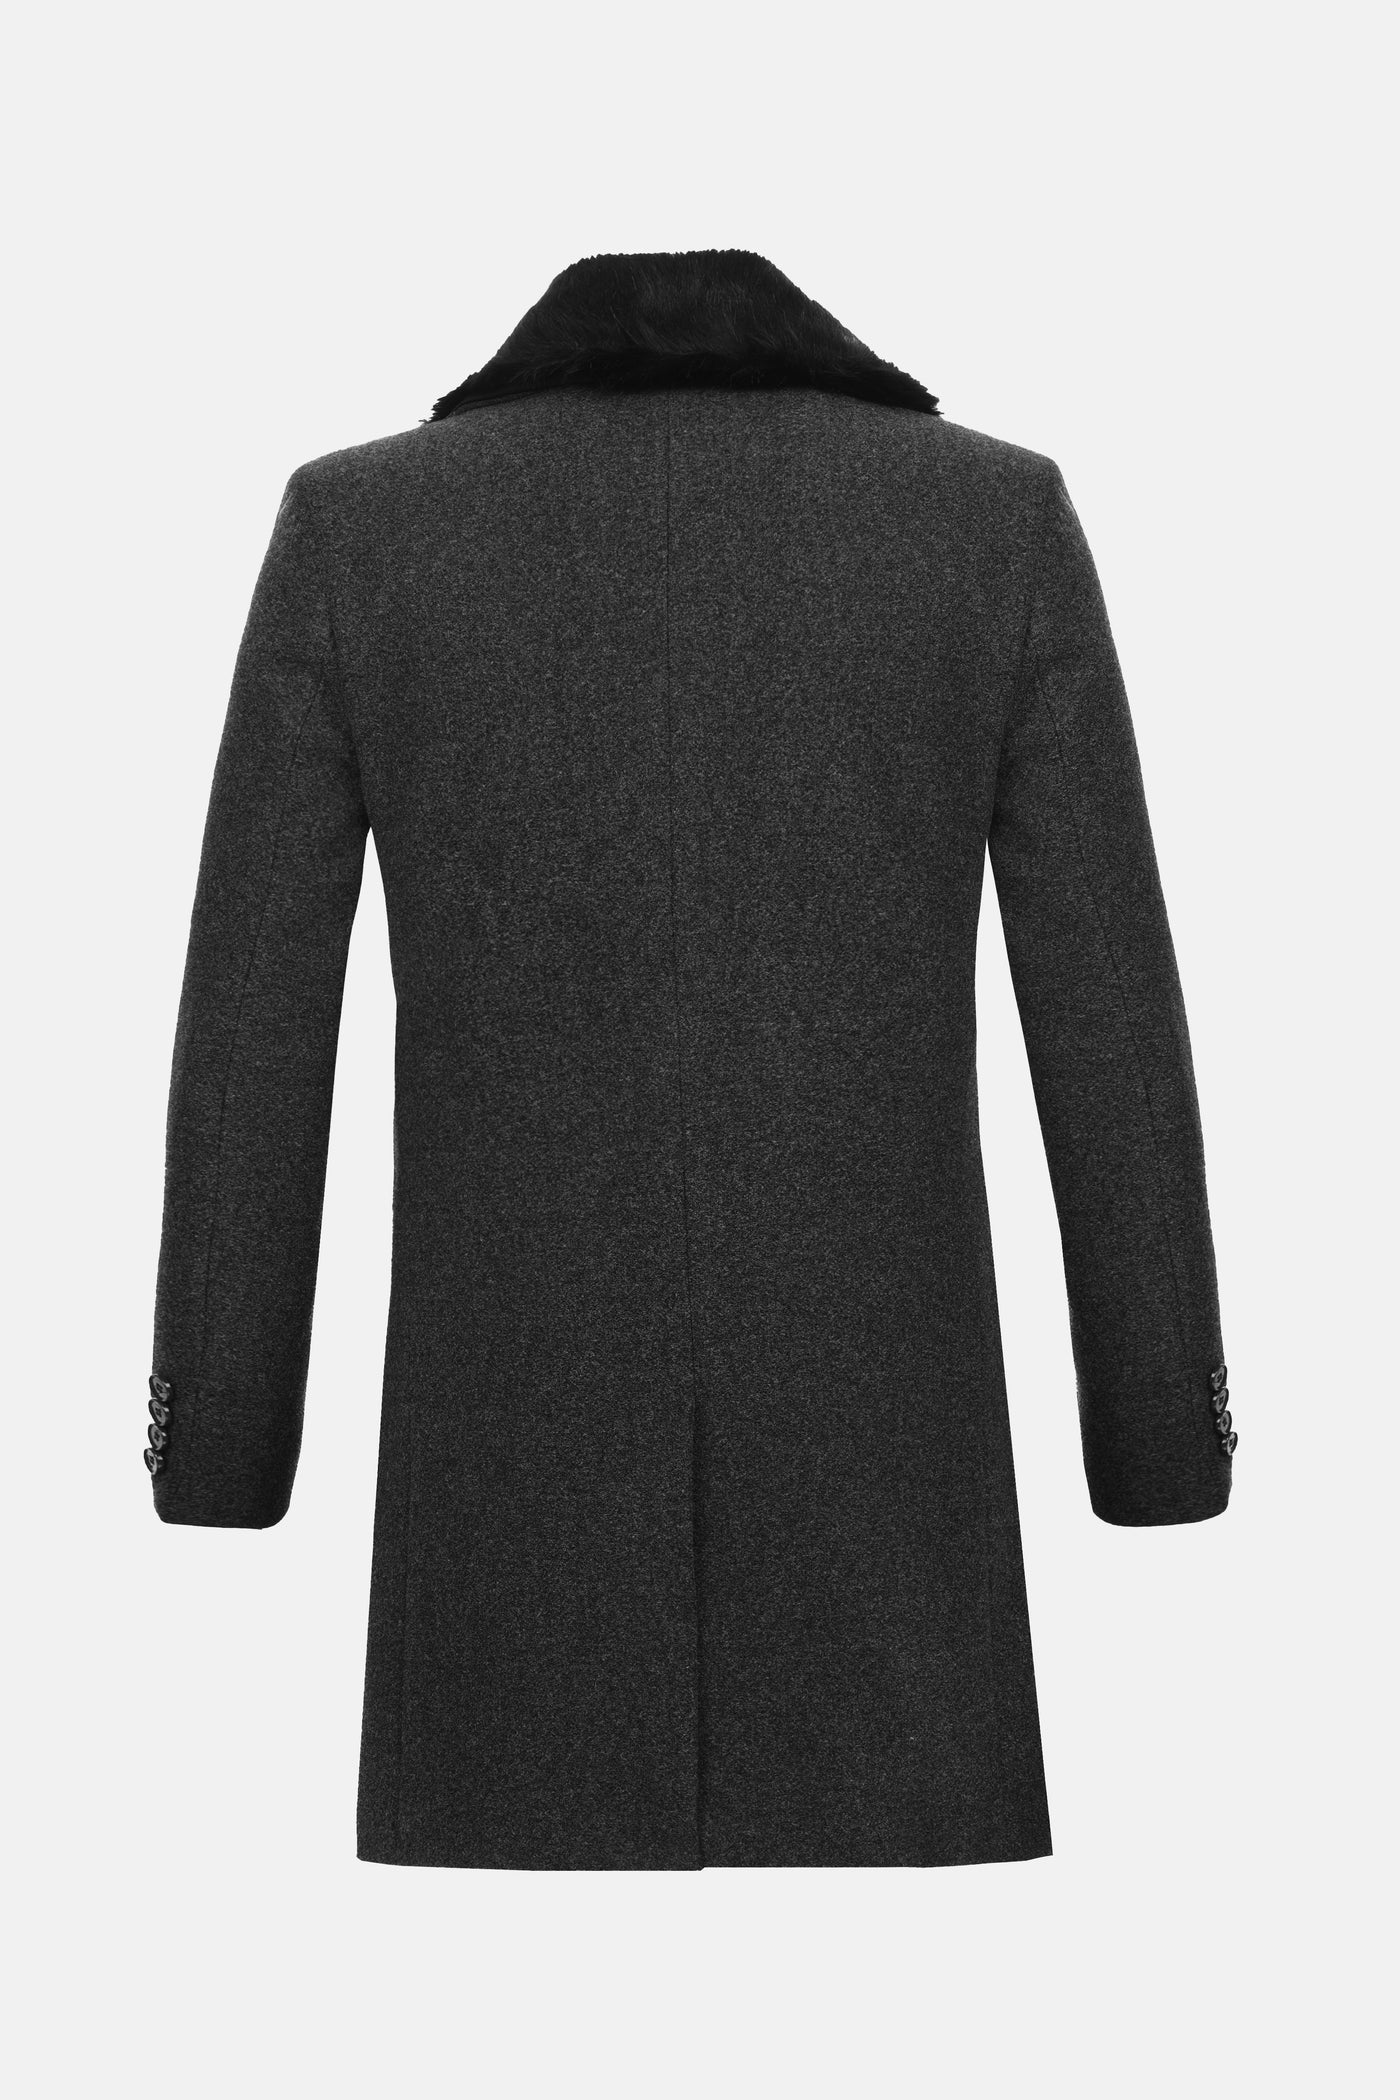 Woven Dark Gray & Black Long Coat with removable Fur piece